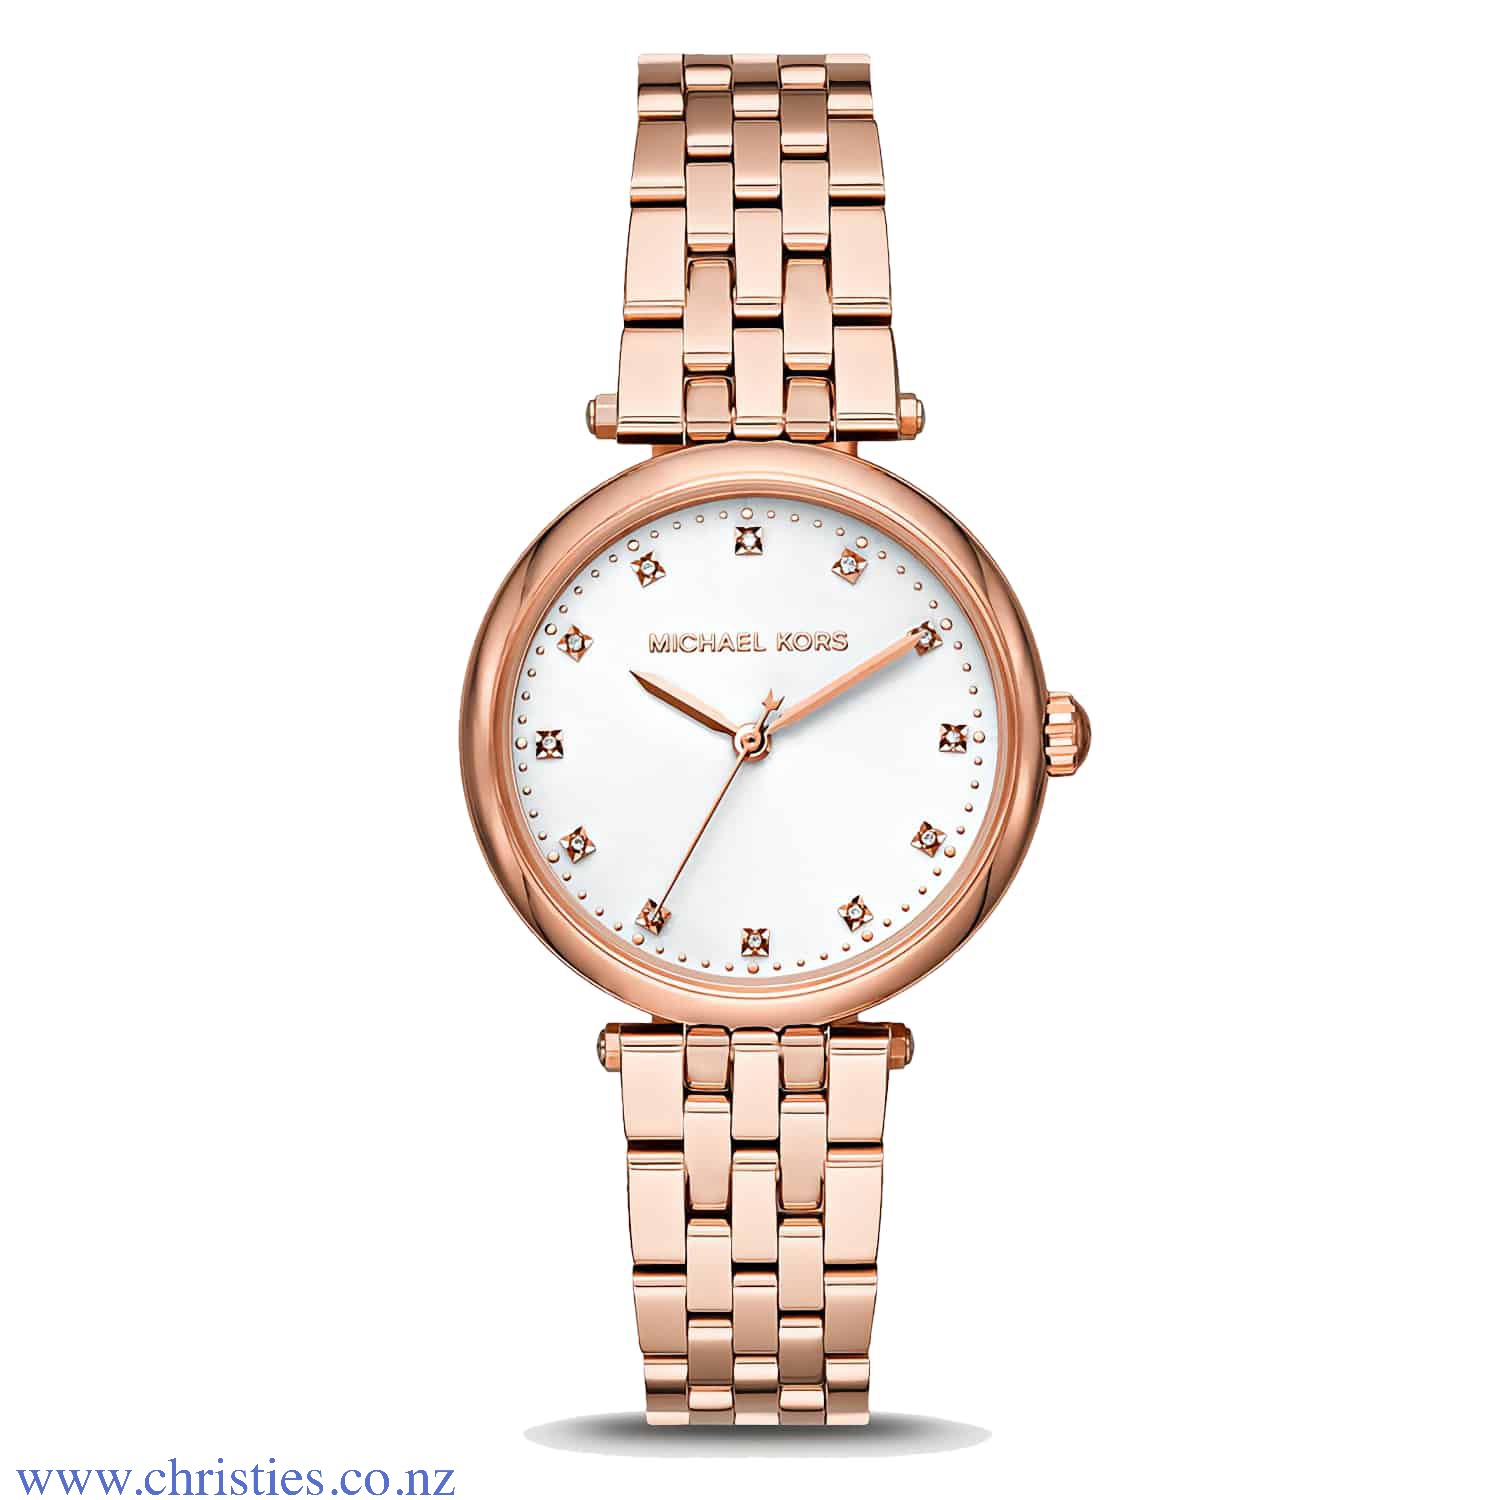 MK4568 Michael Kors Diamond Darci Rose Gold-Tone Watch. The MK4568 Michael Kors Diamond Darci Rose Gold-Tone Watch from Michael Kors 2020 collection. LAYBUY - Pay it easy, in 6 weekly payments and have it now. Only pay the price of your purchase, when you